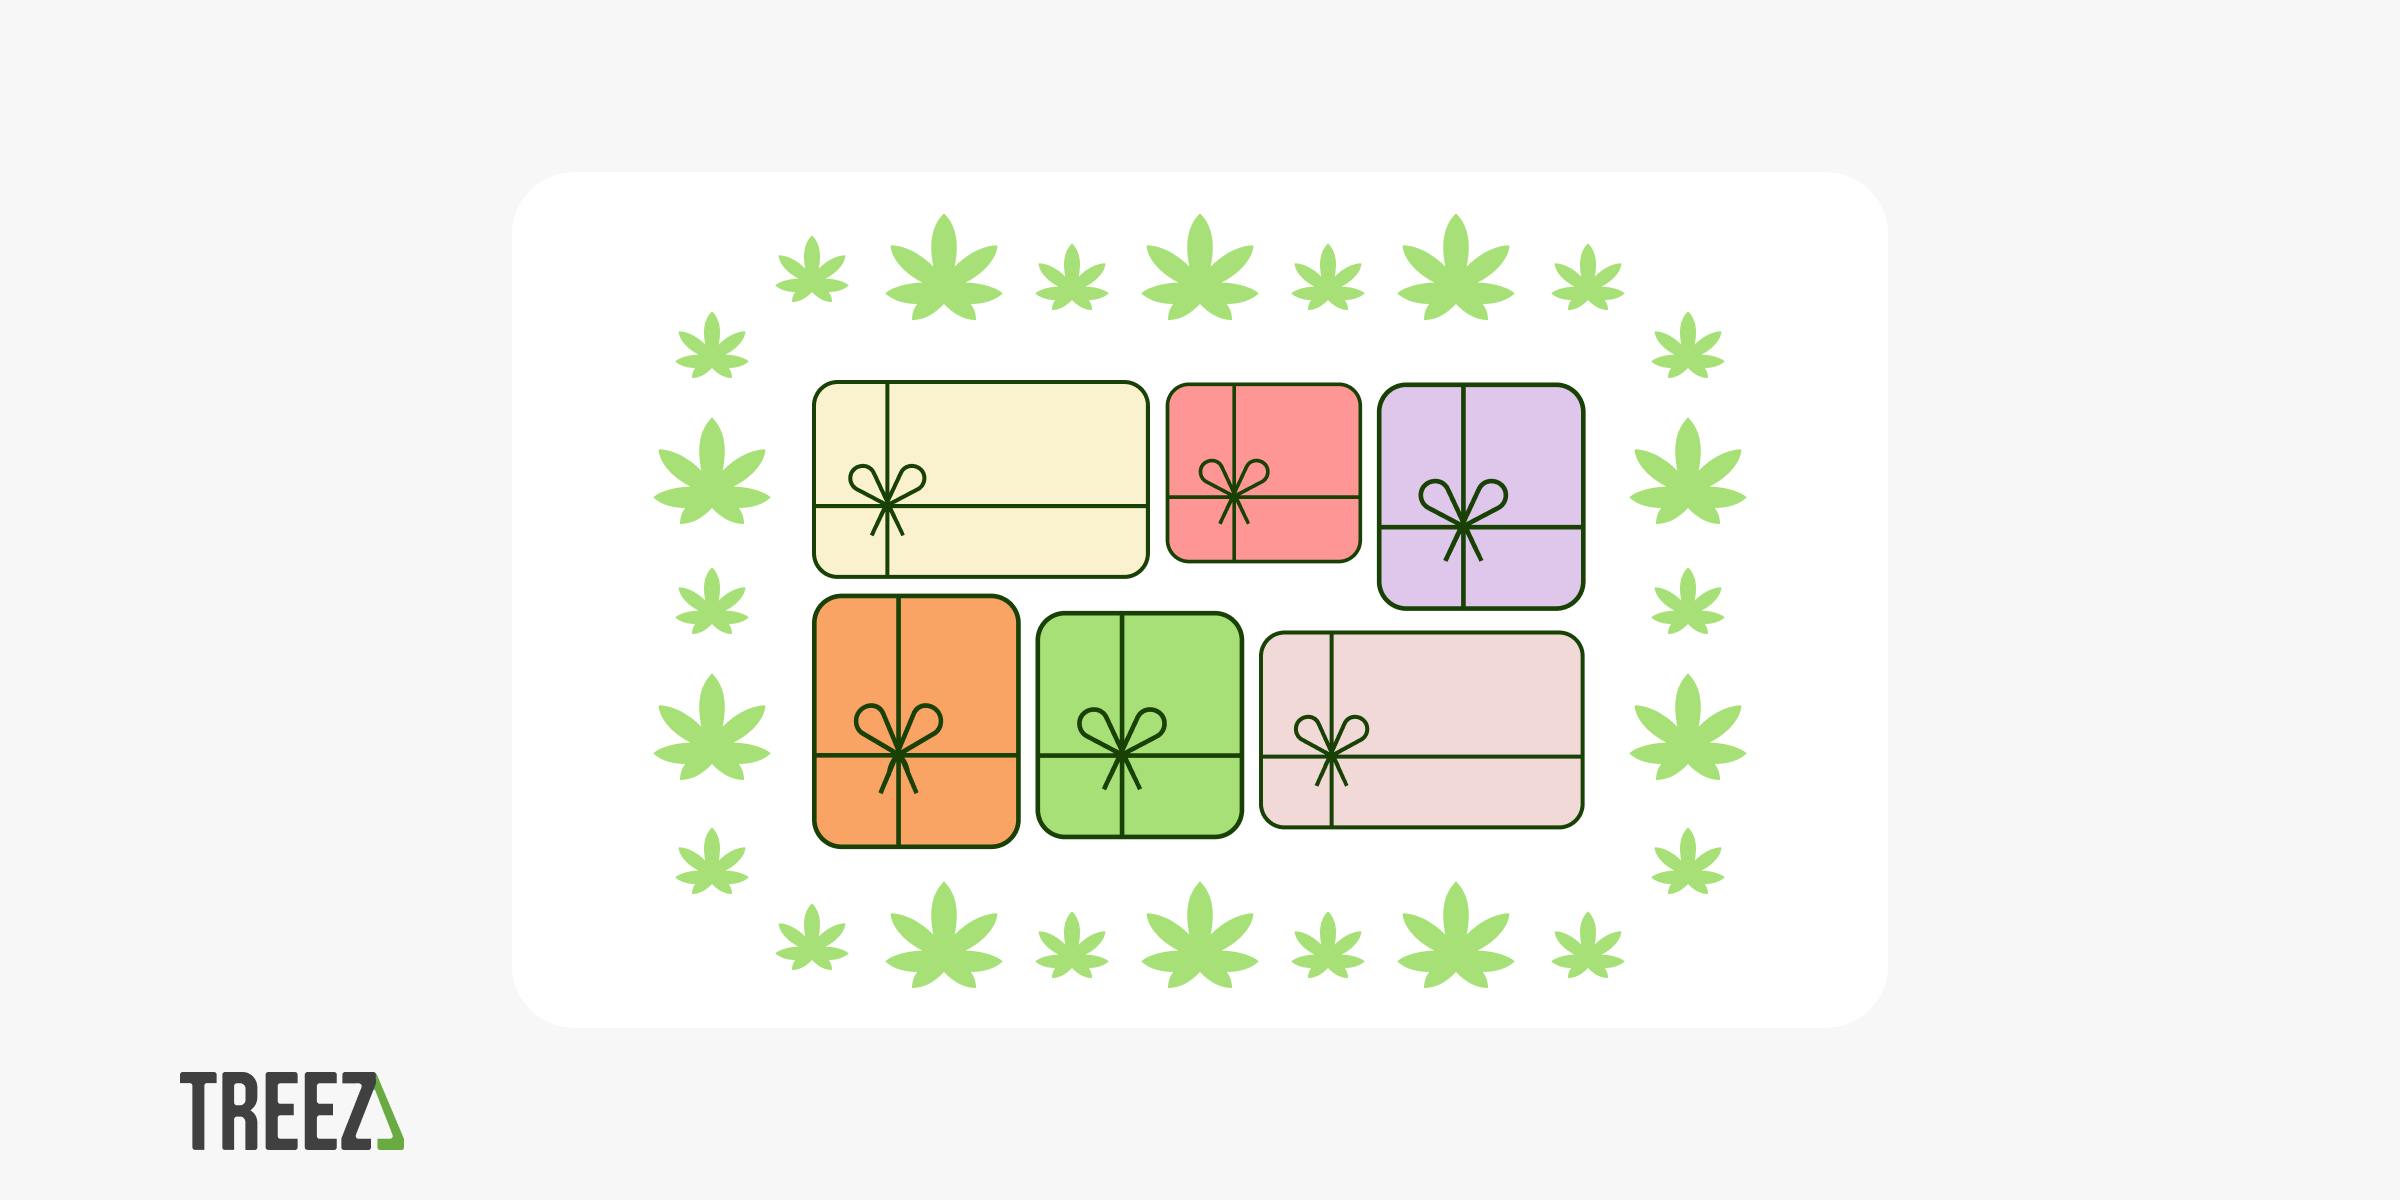 A series of colorful packages are wrapped in bows and surrounded by cannabis leafs. A logo for Treez, the cannabis point of sale and payments company is shown in the bottom left.